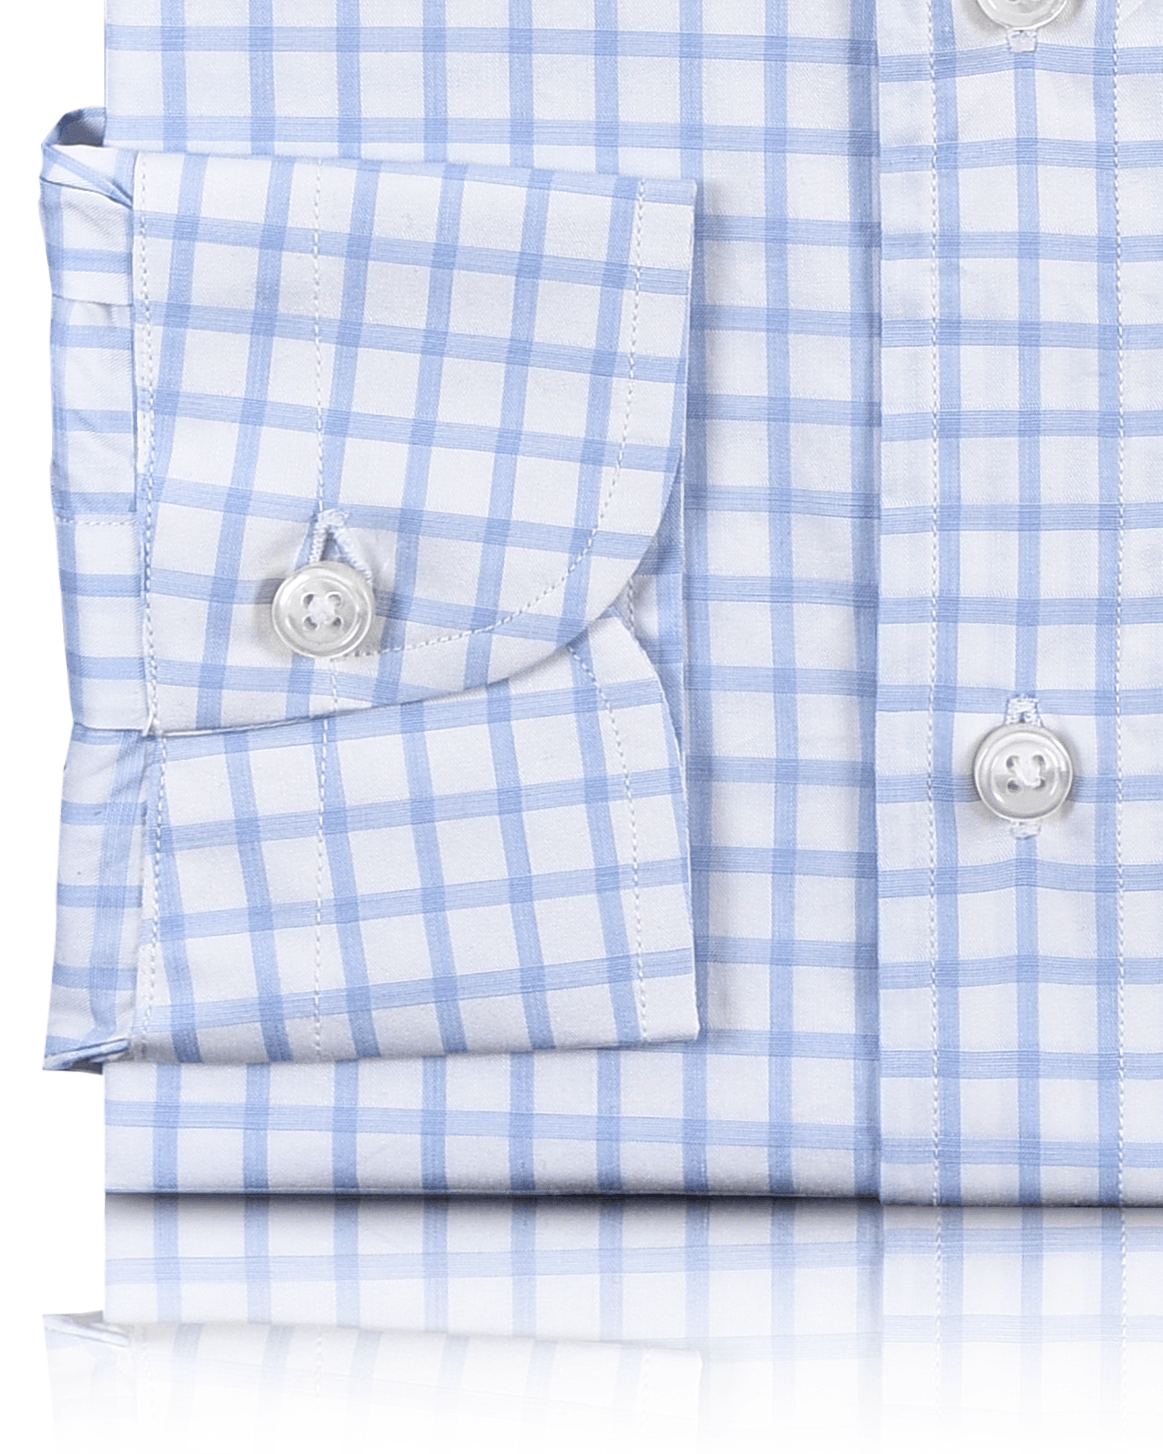 Close cuff view of custom check shirts for men by Luxire light blue plaid